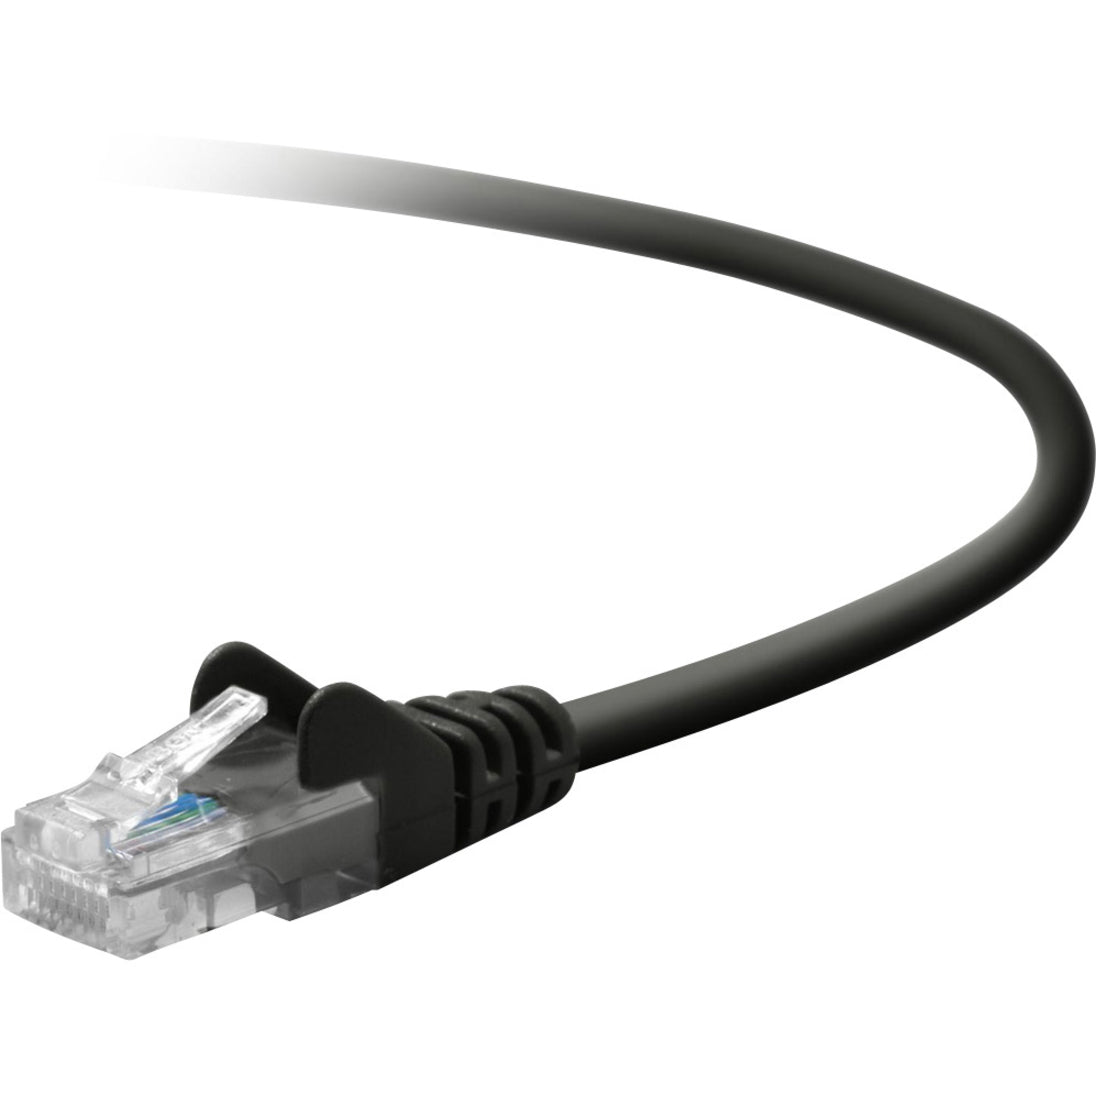 Belkin A3L791B50BLKS Cat. 5E Patch Cable, 50 ft, Snagless, Copper Conductor, Black